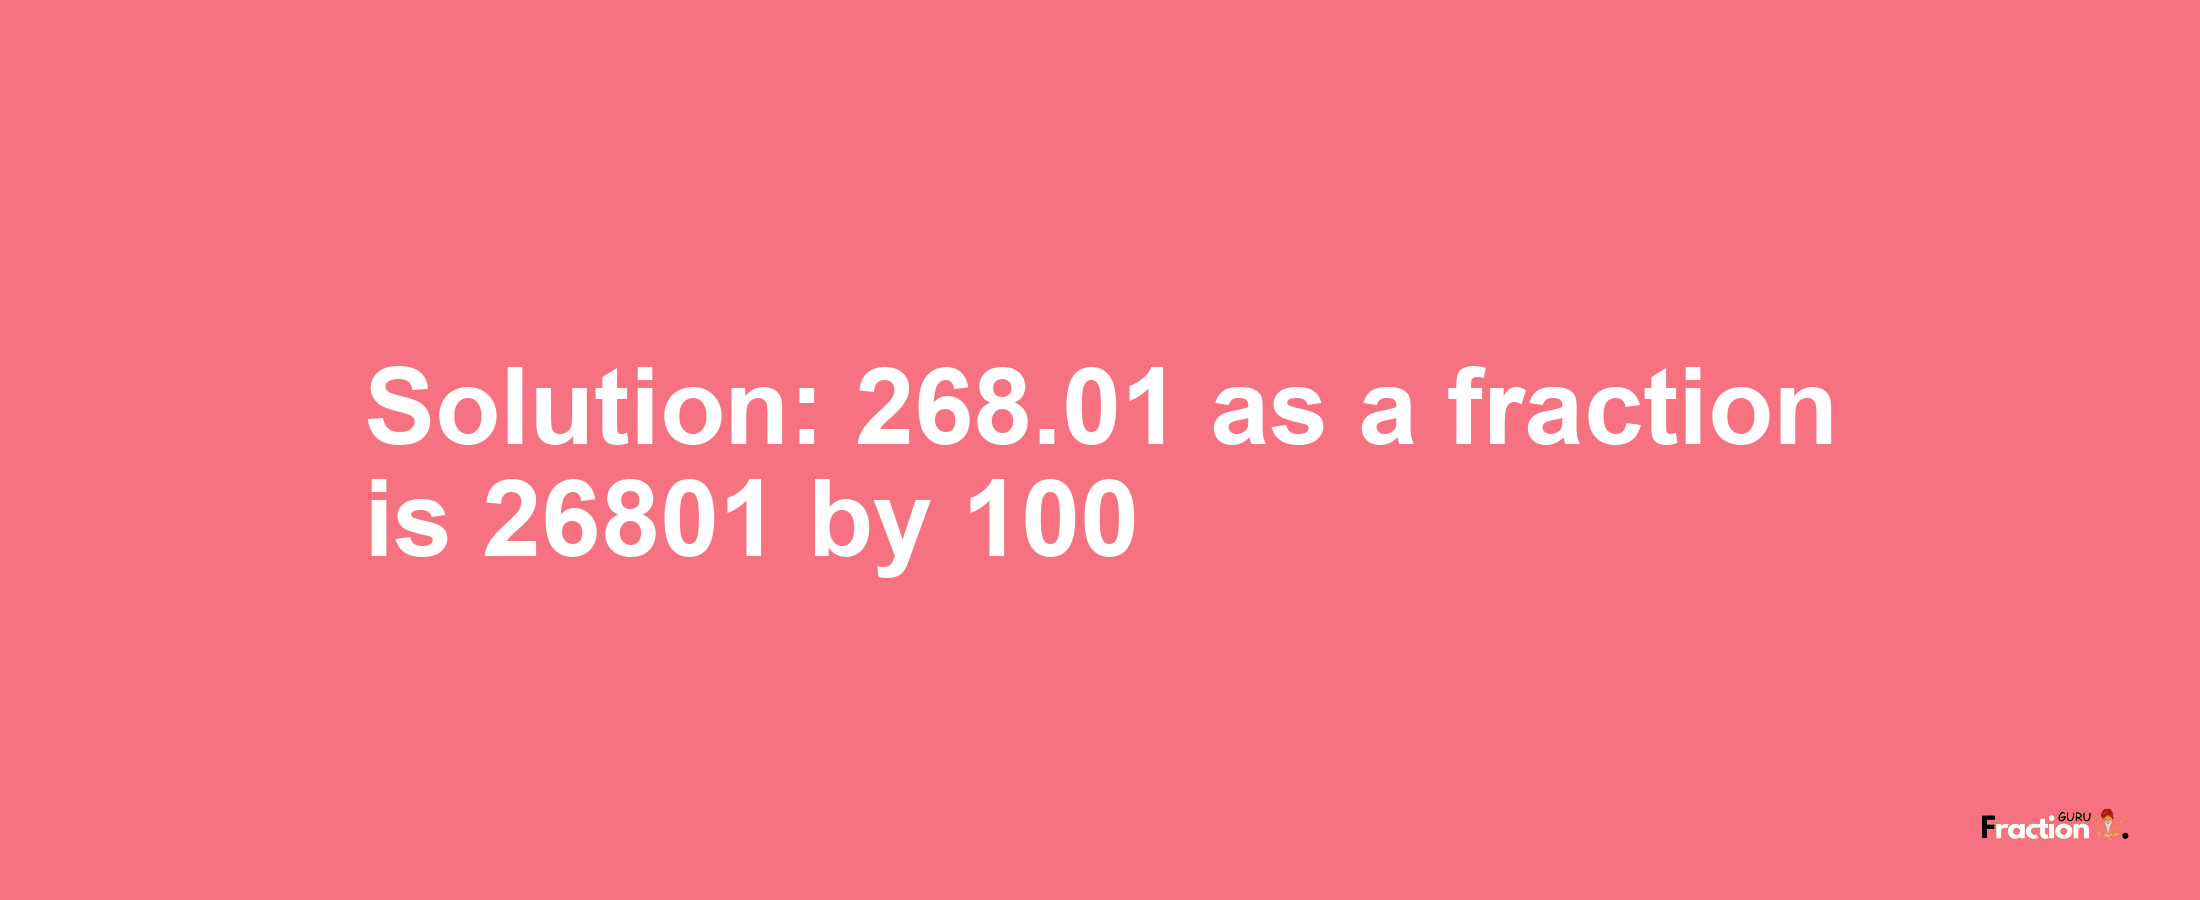 Solution:268.01 as a fraction is 26801/100